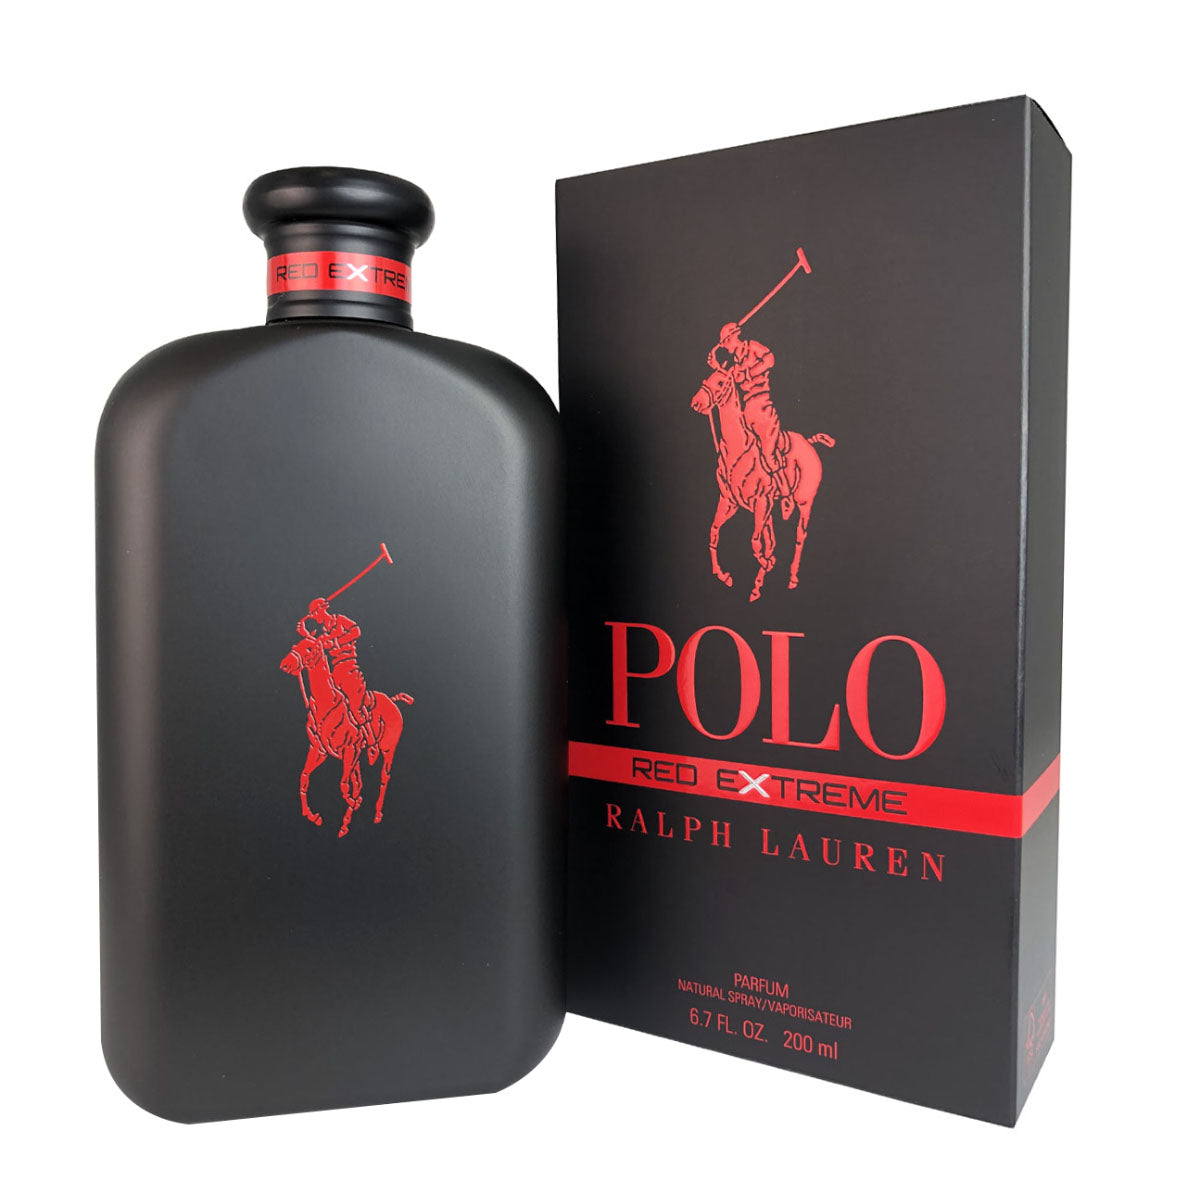 Polo Red Extreme For Men By Ralph Lauren 6.7 oz Parfum Natural Spray